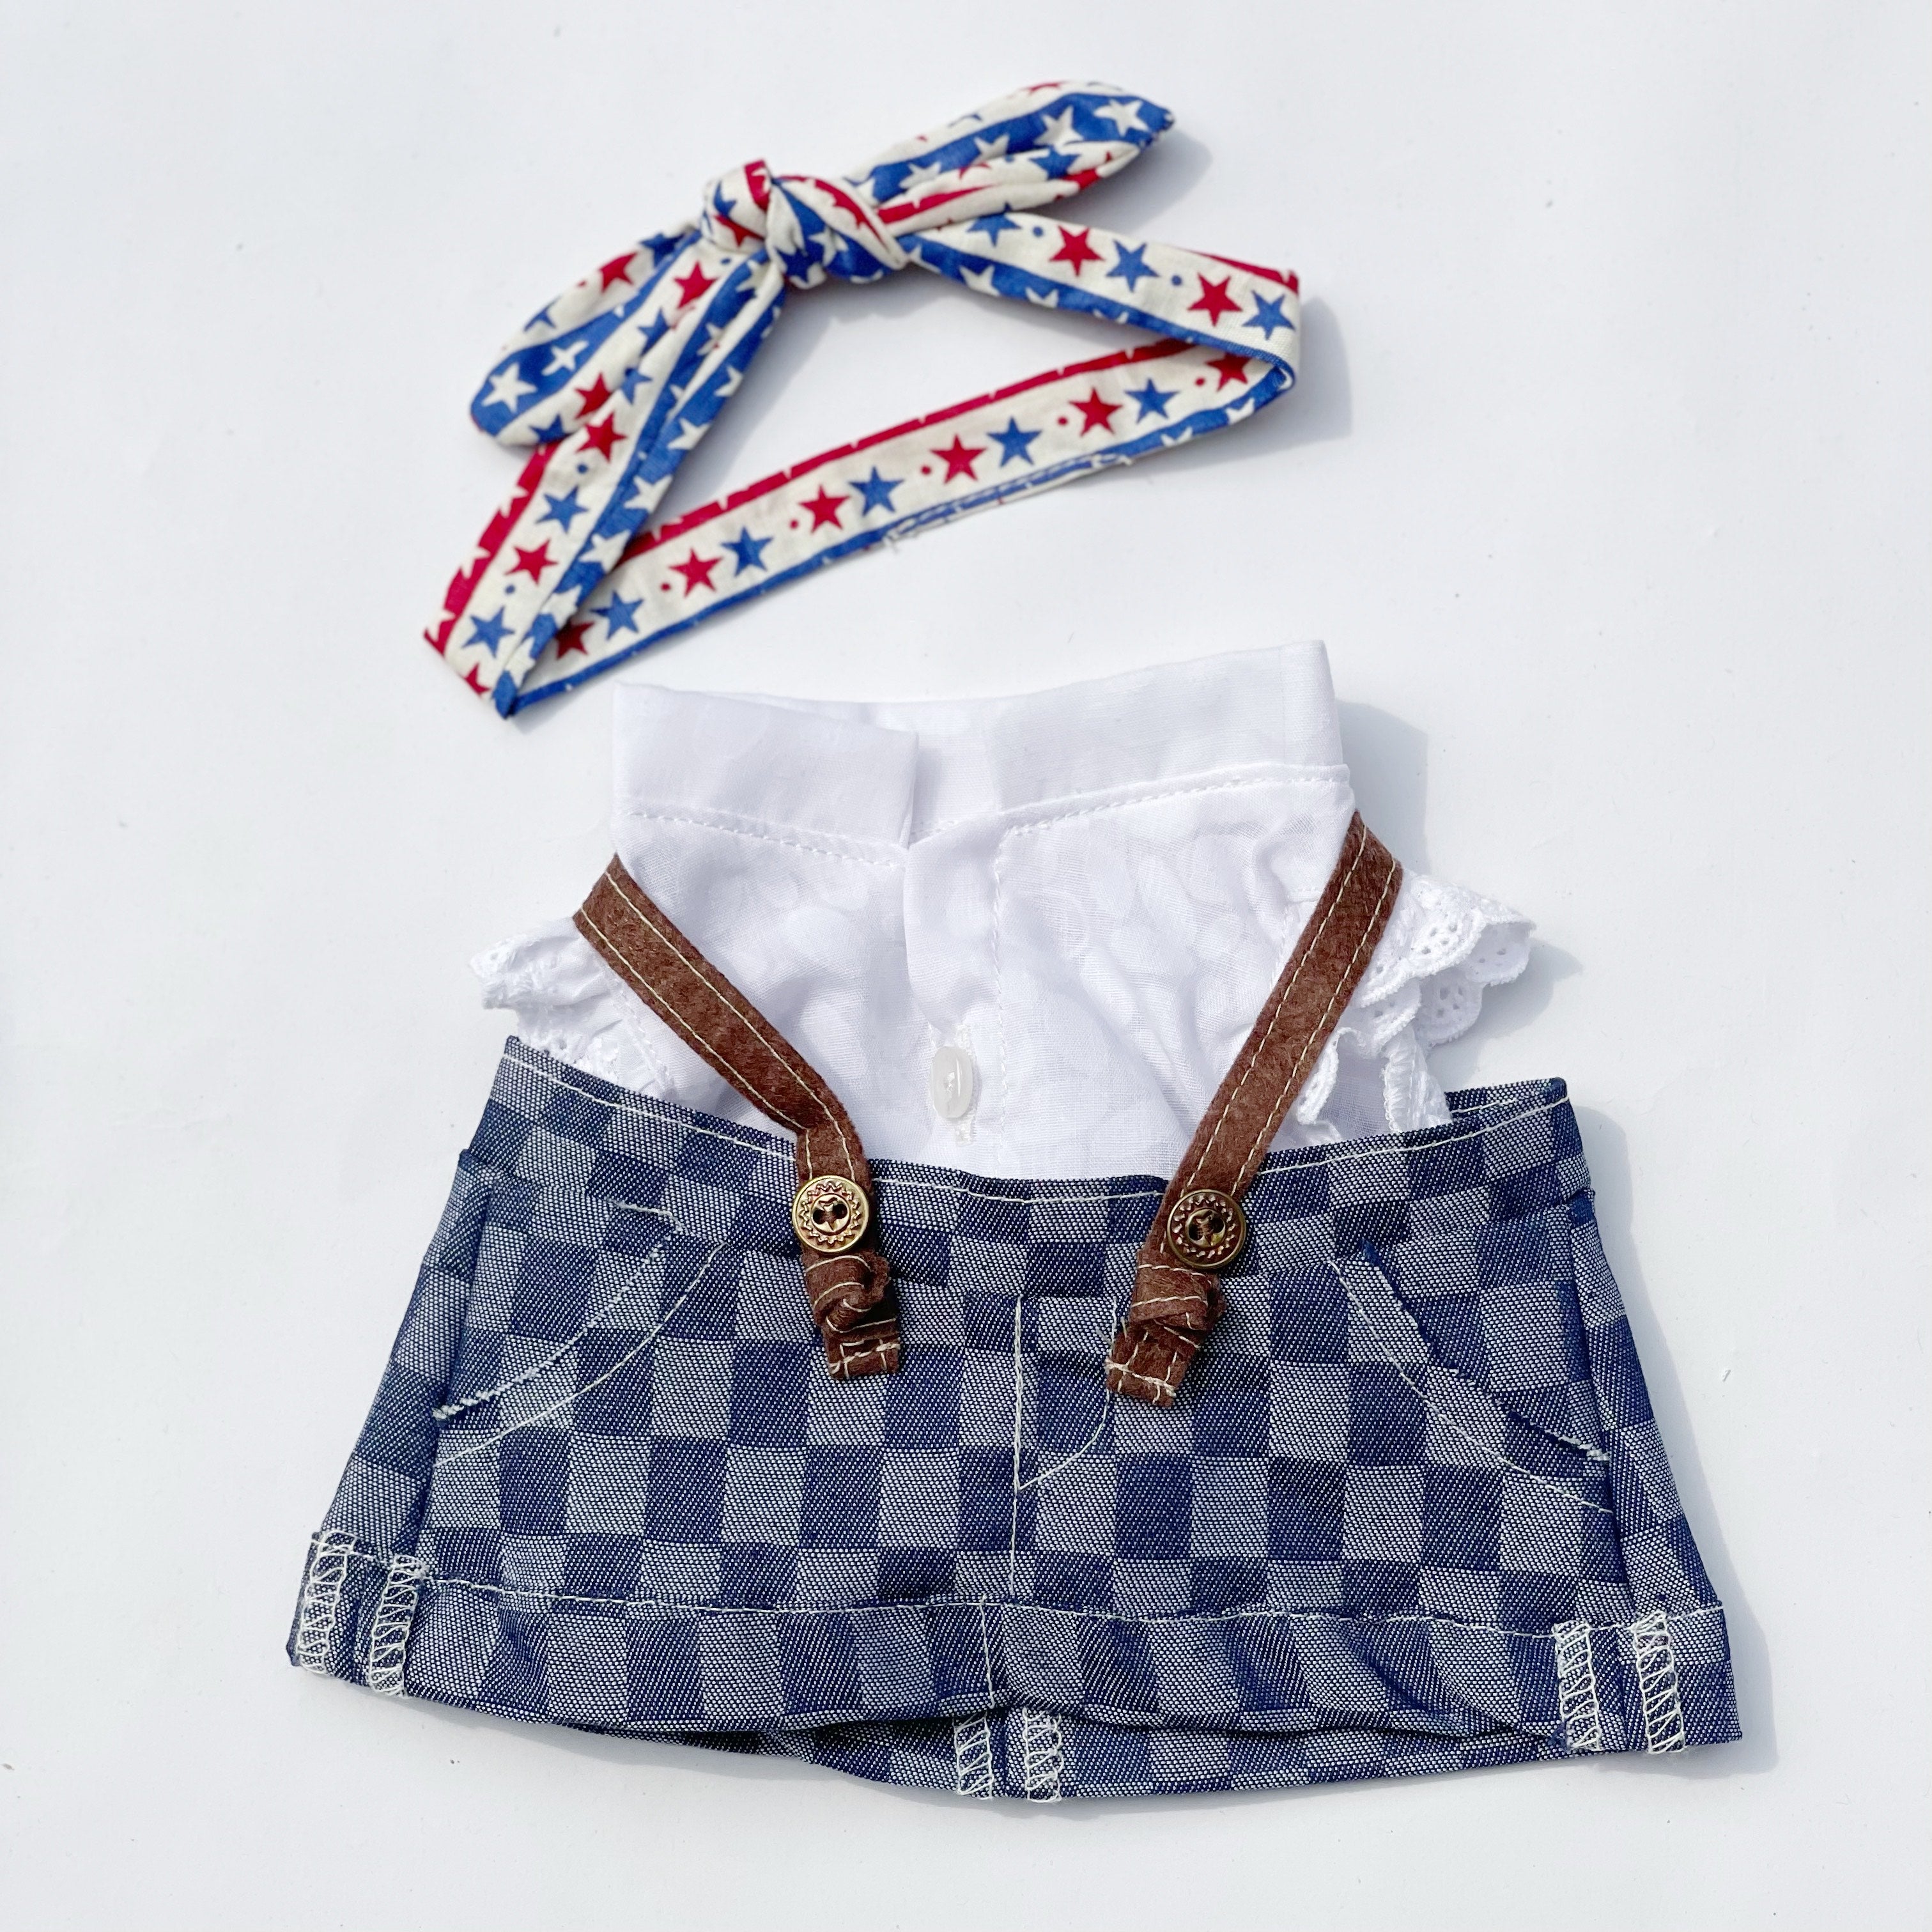 DENIM SKIRT WITH T-SHIRT 48" - 60" TEDDY IN COUNTRY